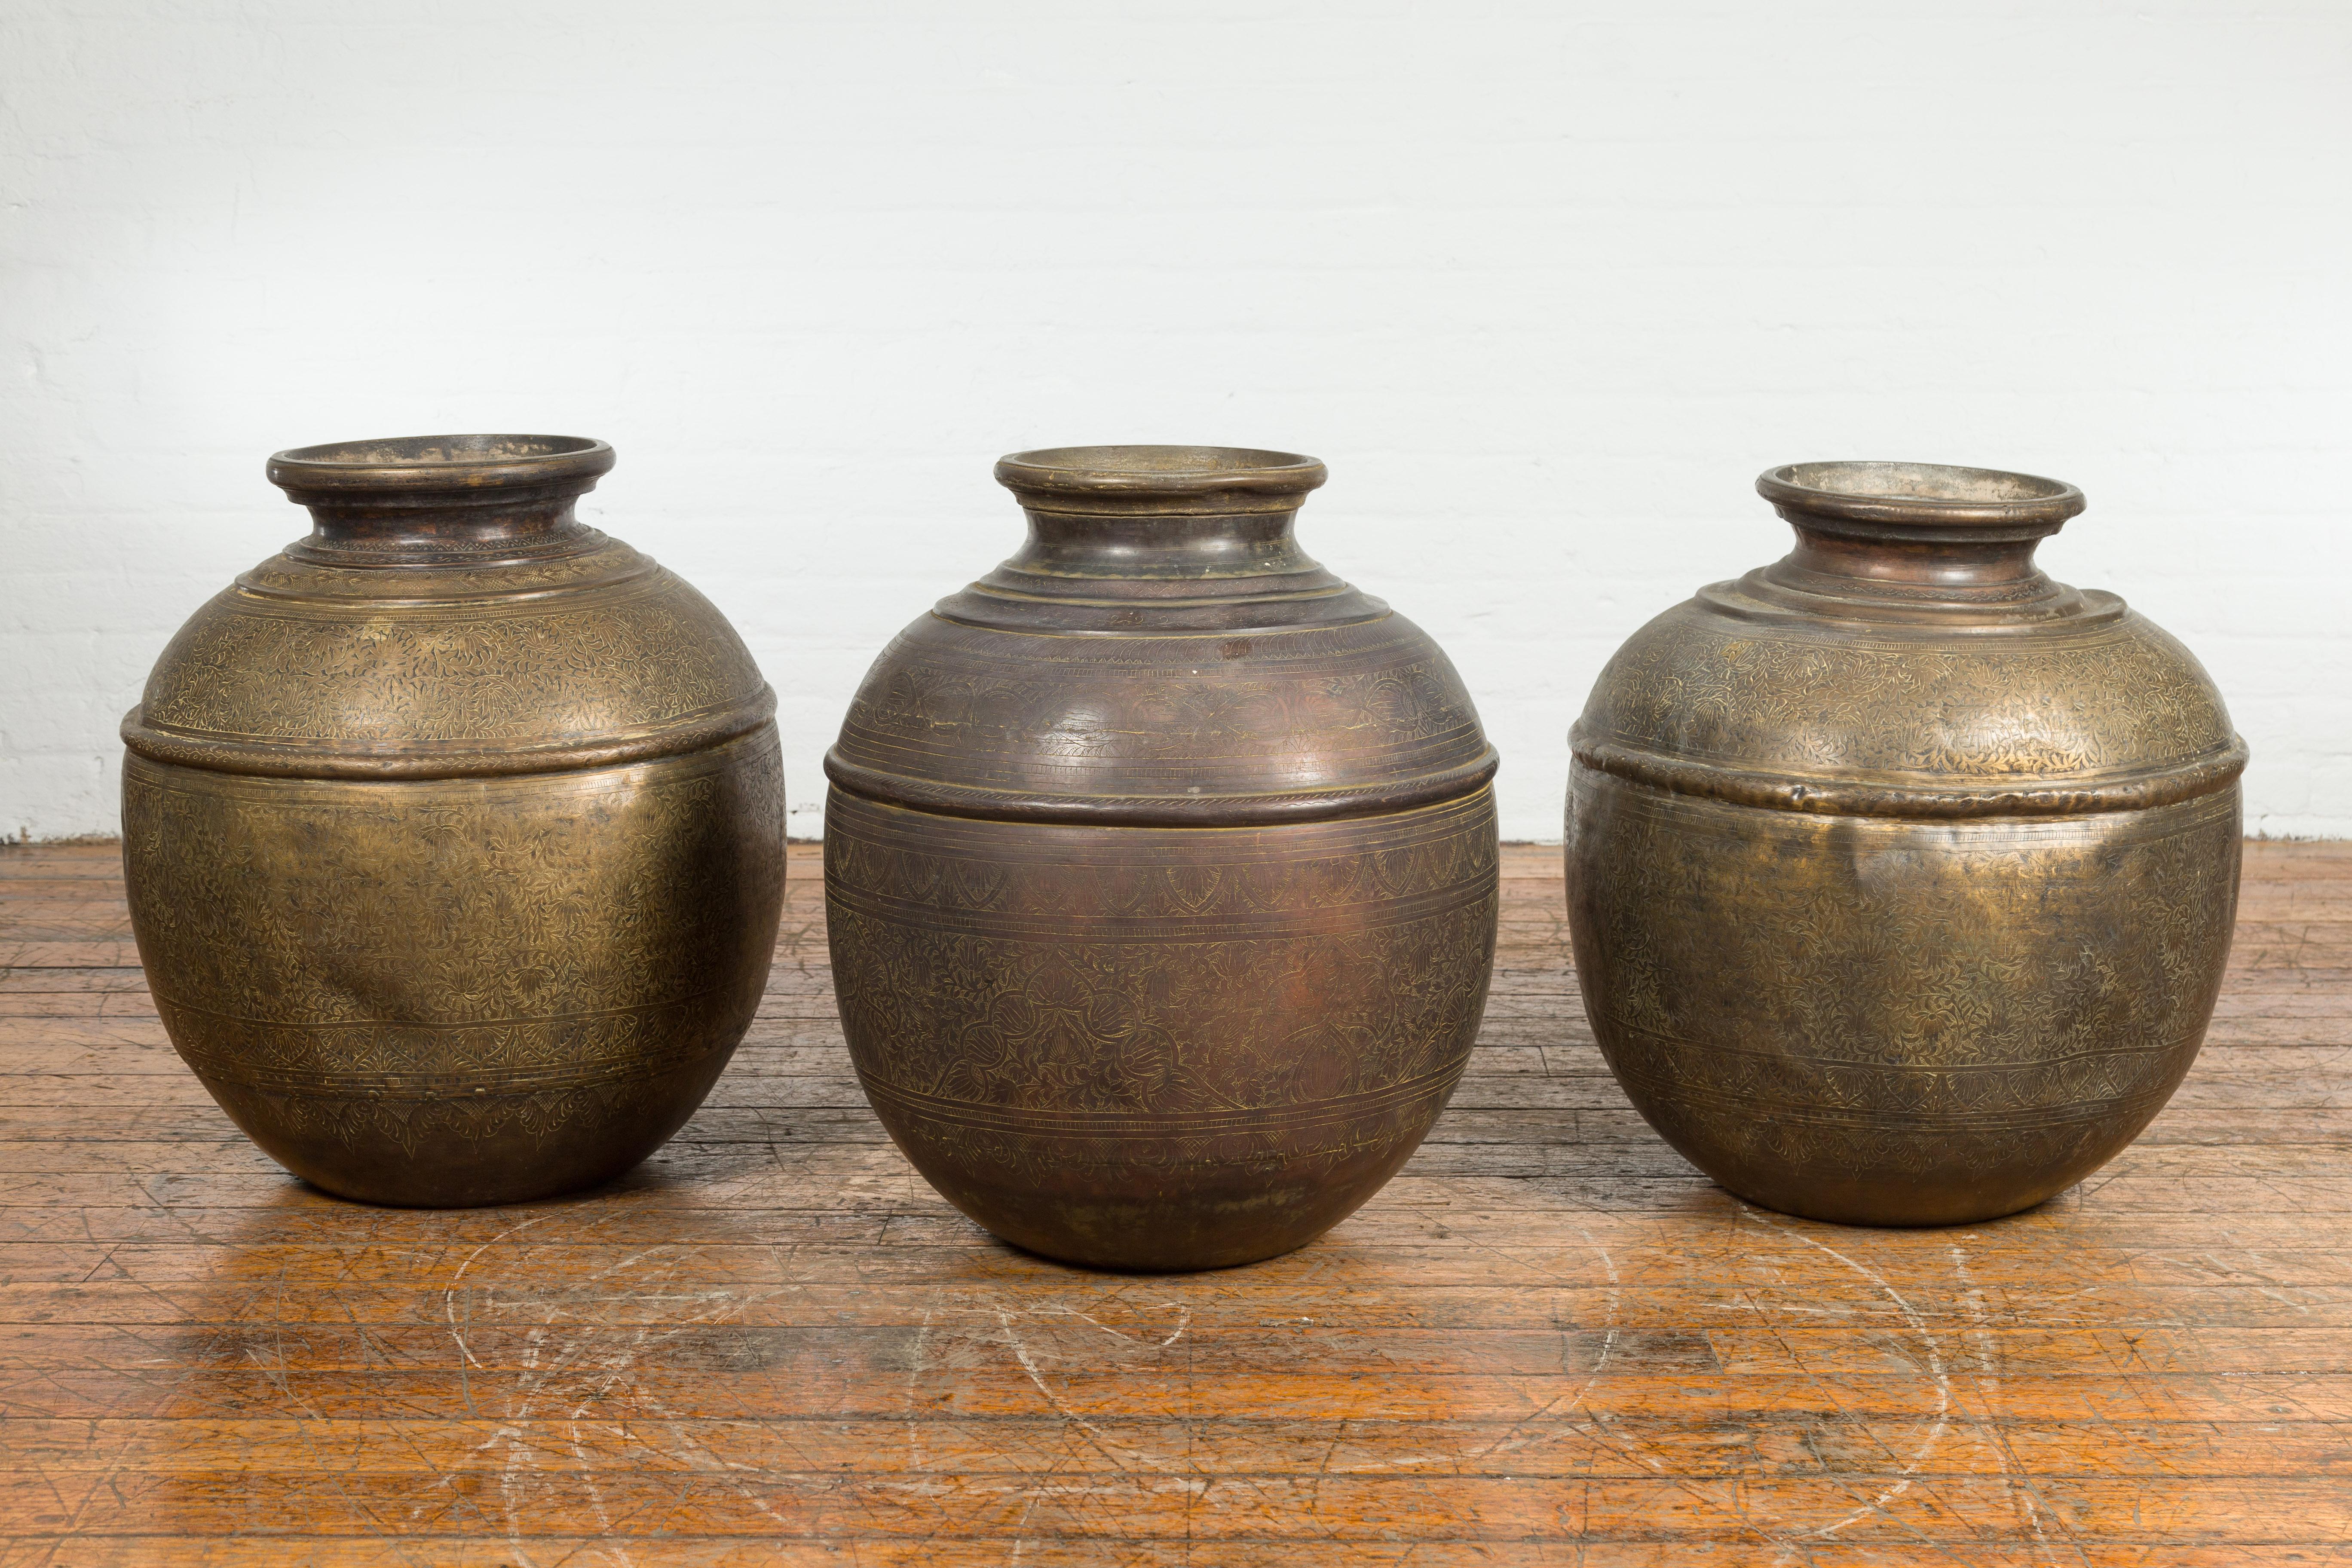 Three antique Indian brass water vessels from the 19th century, with etched floral décor and weathered appearance. We are pricing and selling these individually. Created in India during the 19th century, each of these large brass water vessels would